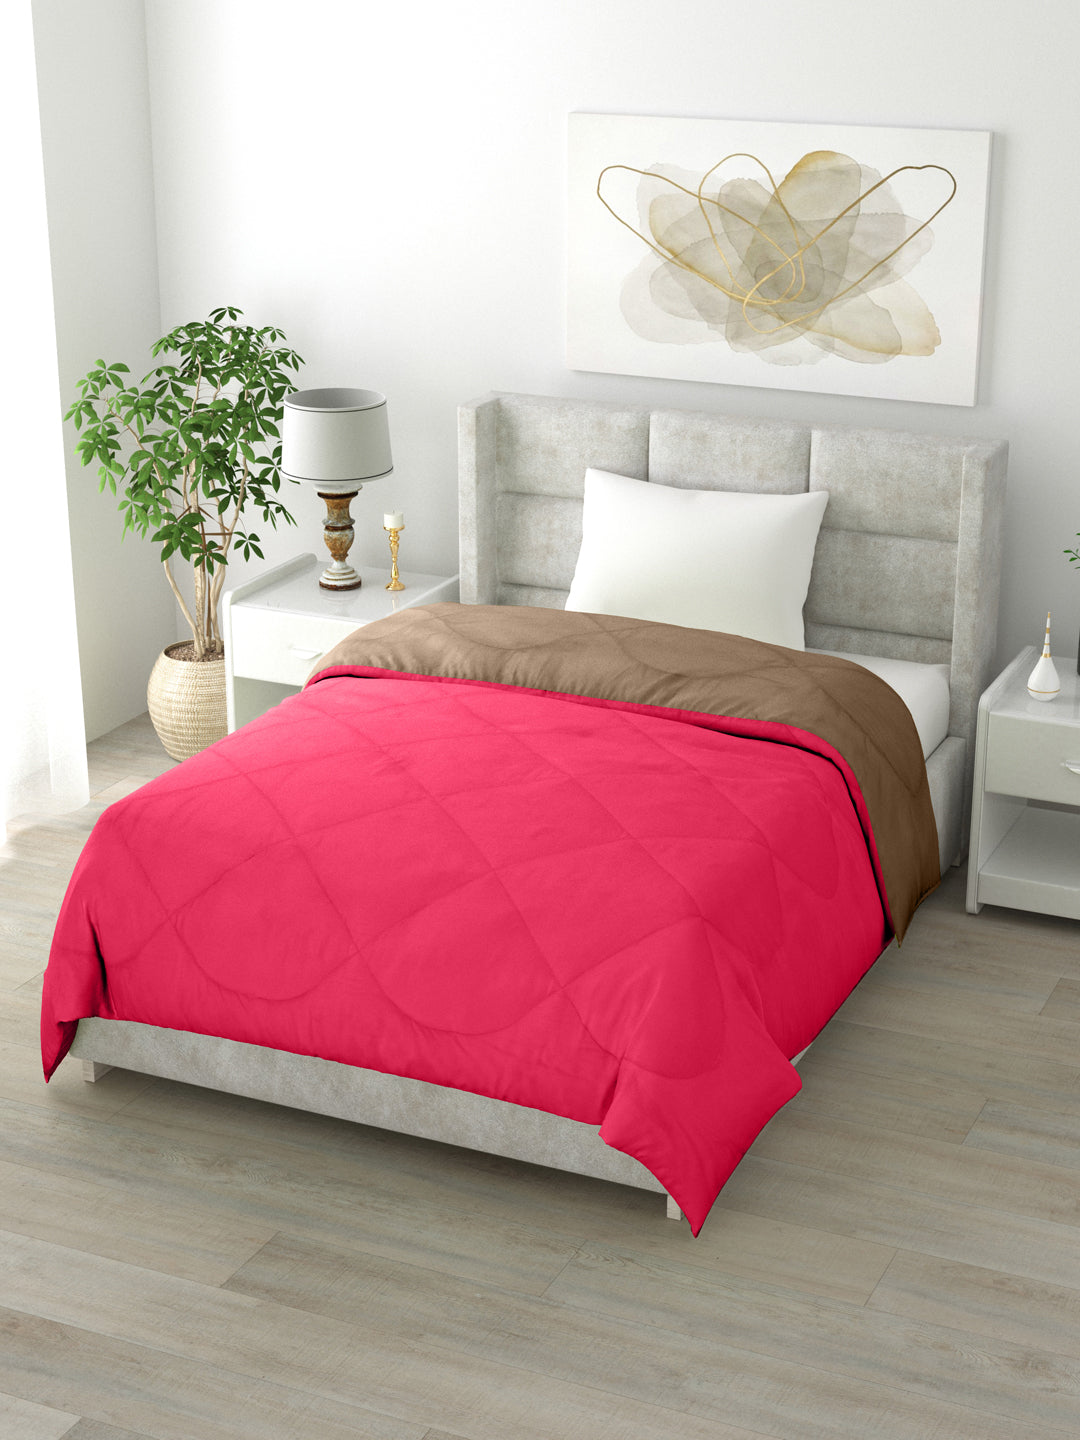 Reversible Single Bed Comforter 200 GSM 60x90 Inches (Taupe & Pink)